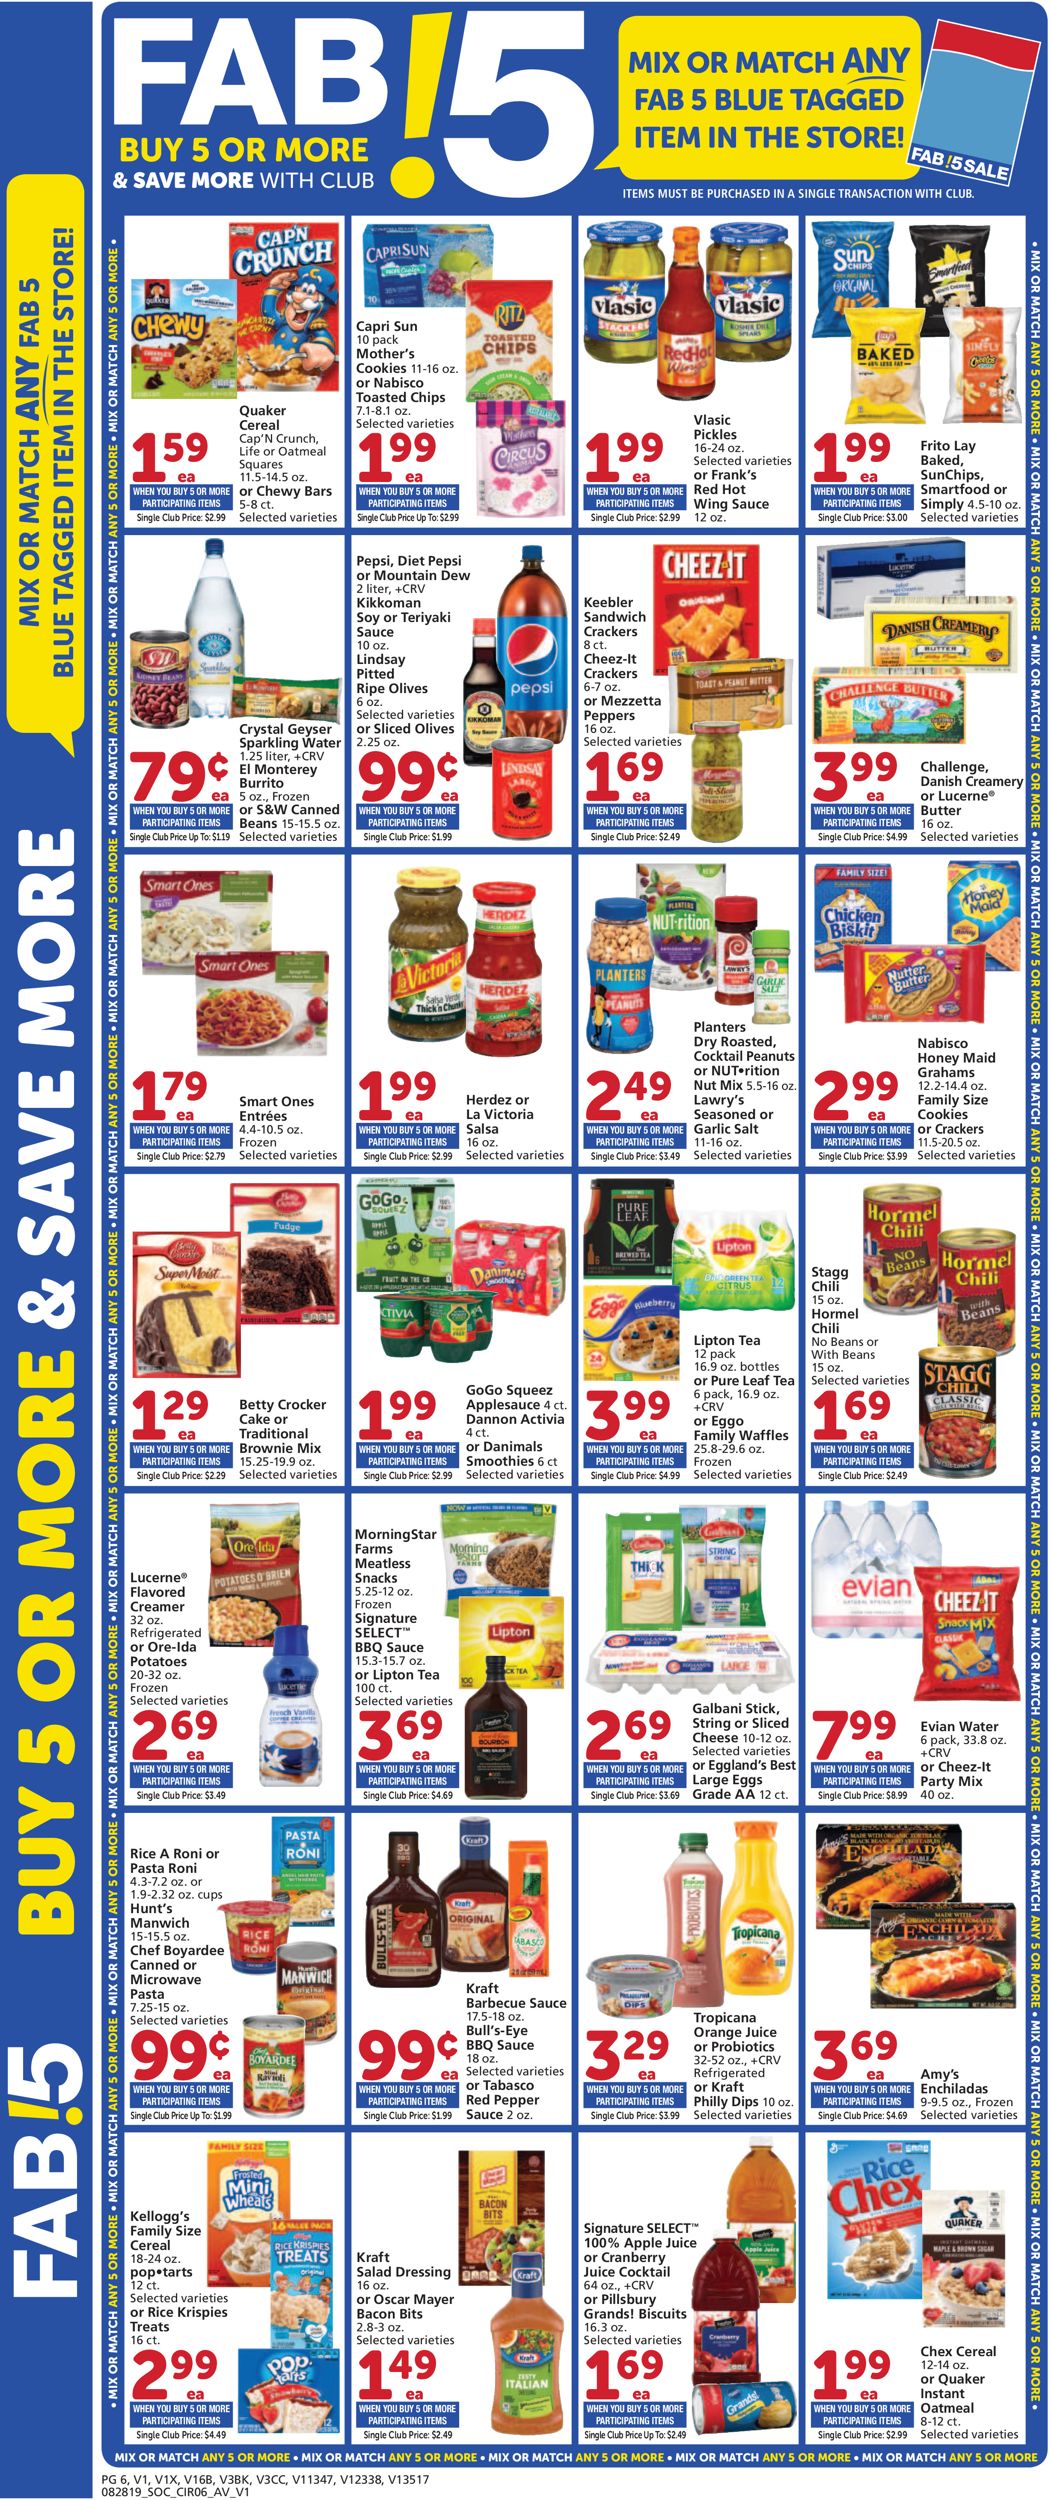 Catalogue Vons from 08/28/2019